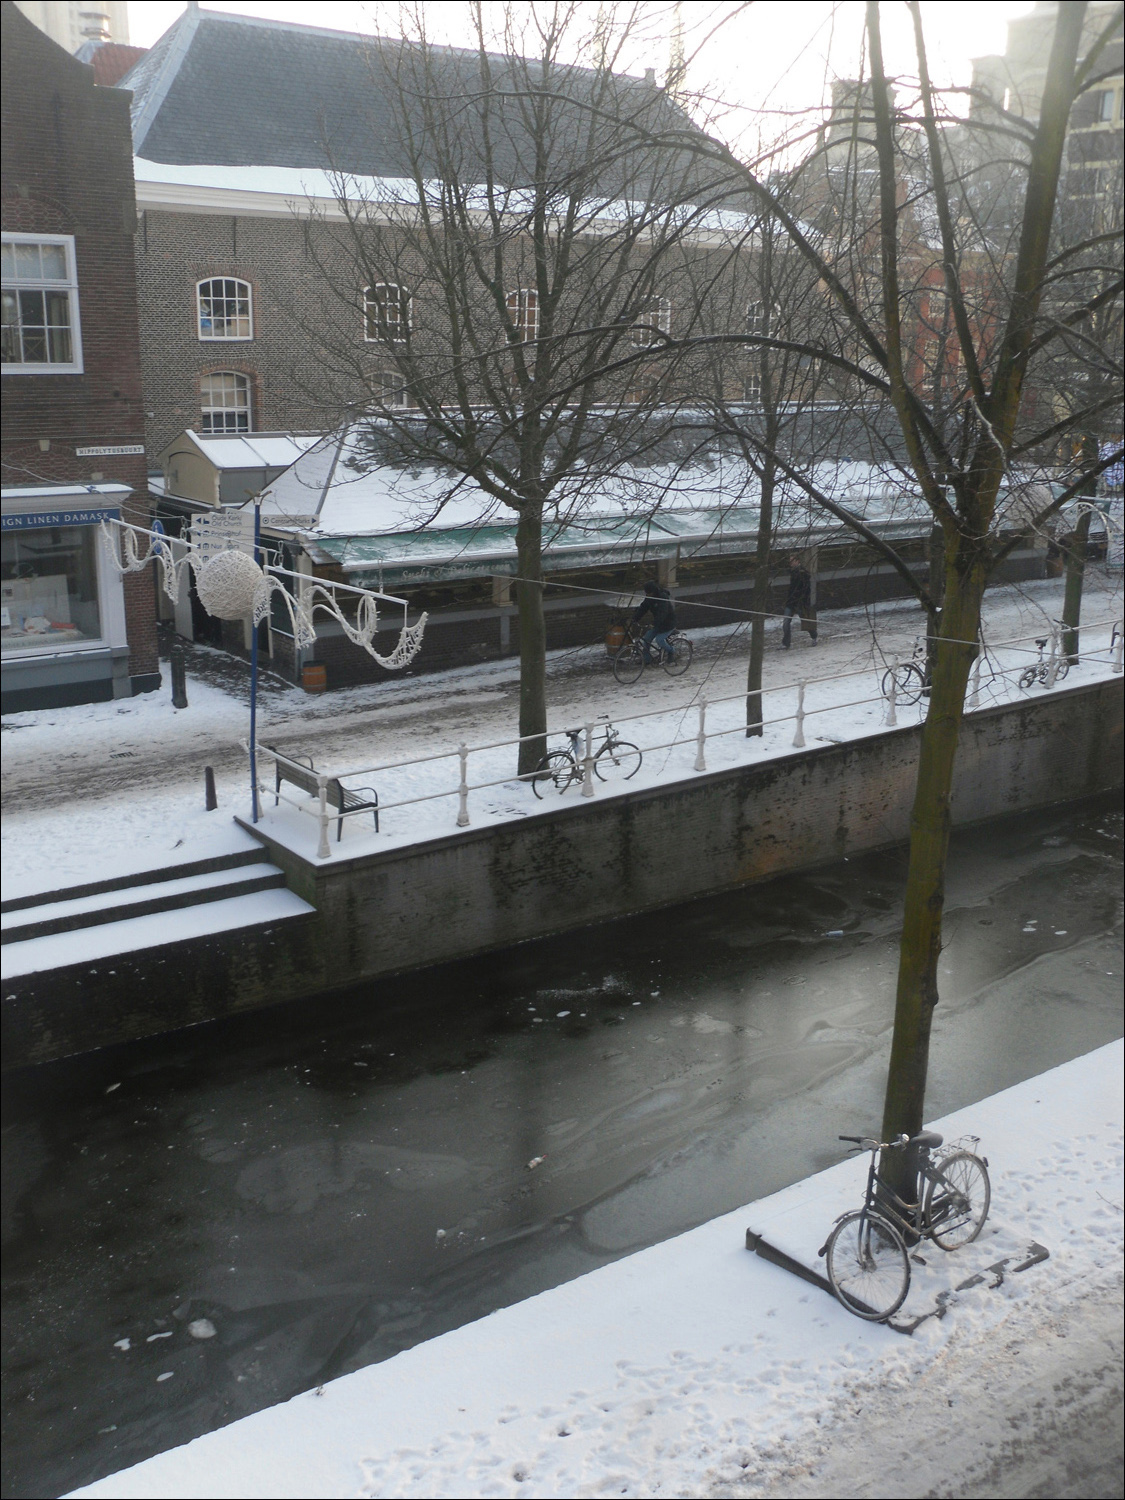 View of Hippolytusbuurt st canal from our dining room following snowfall